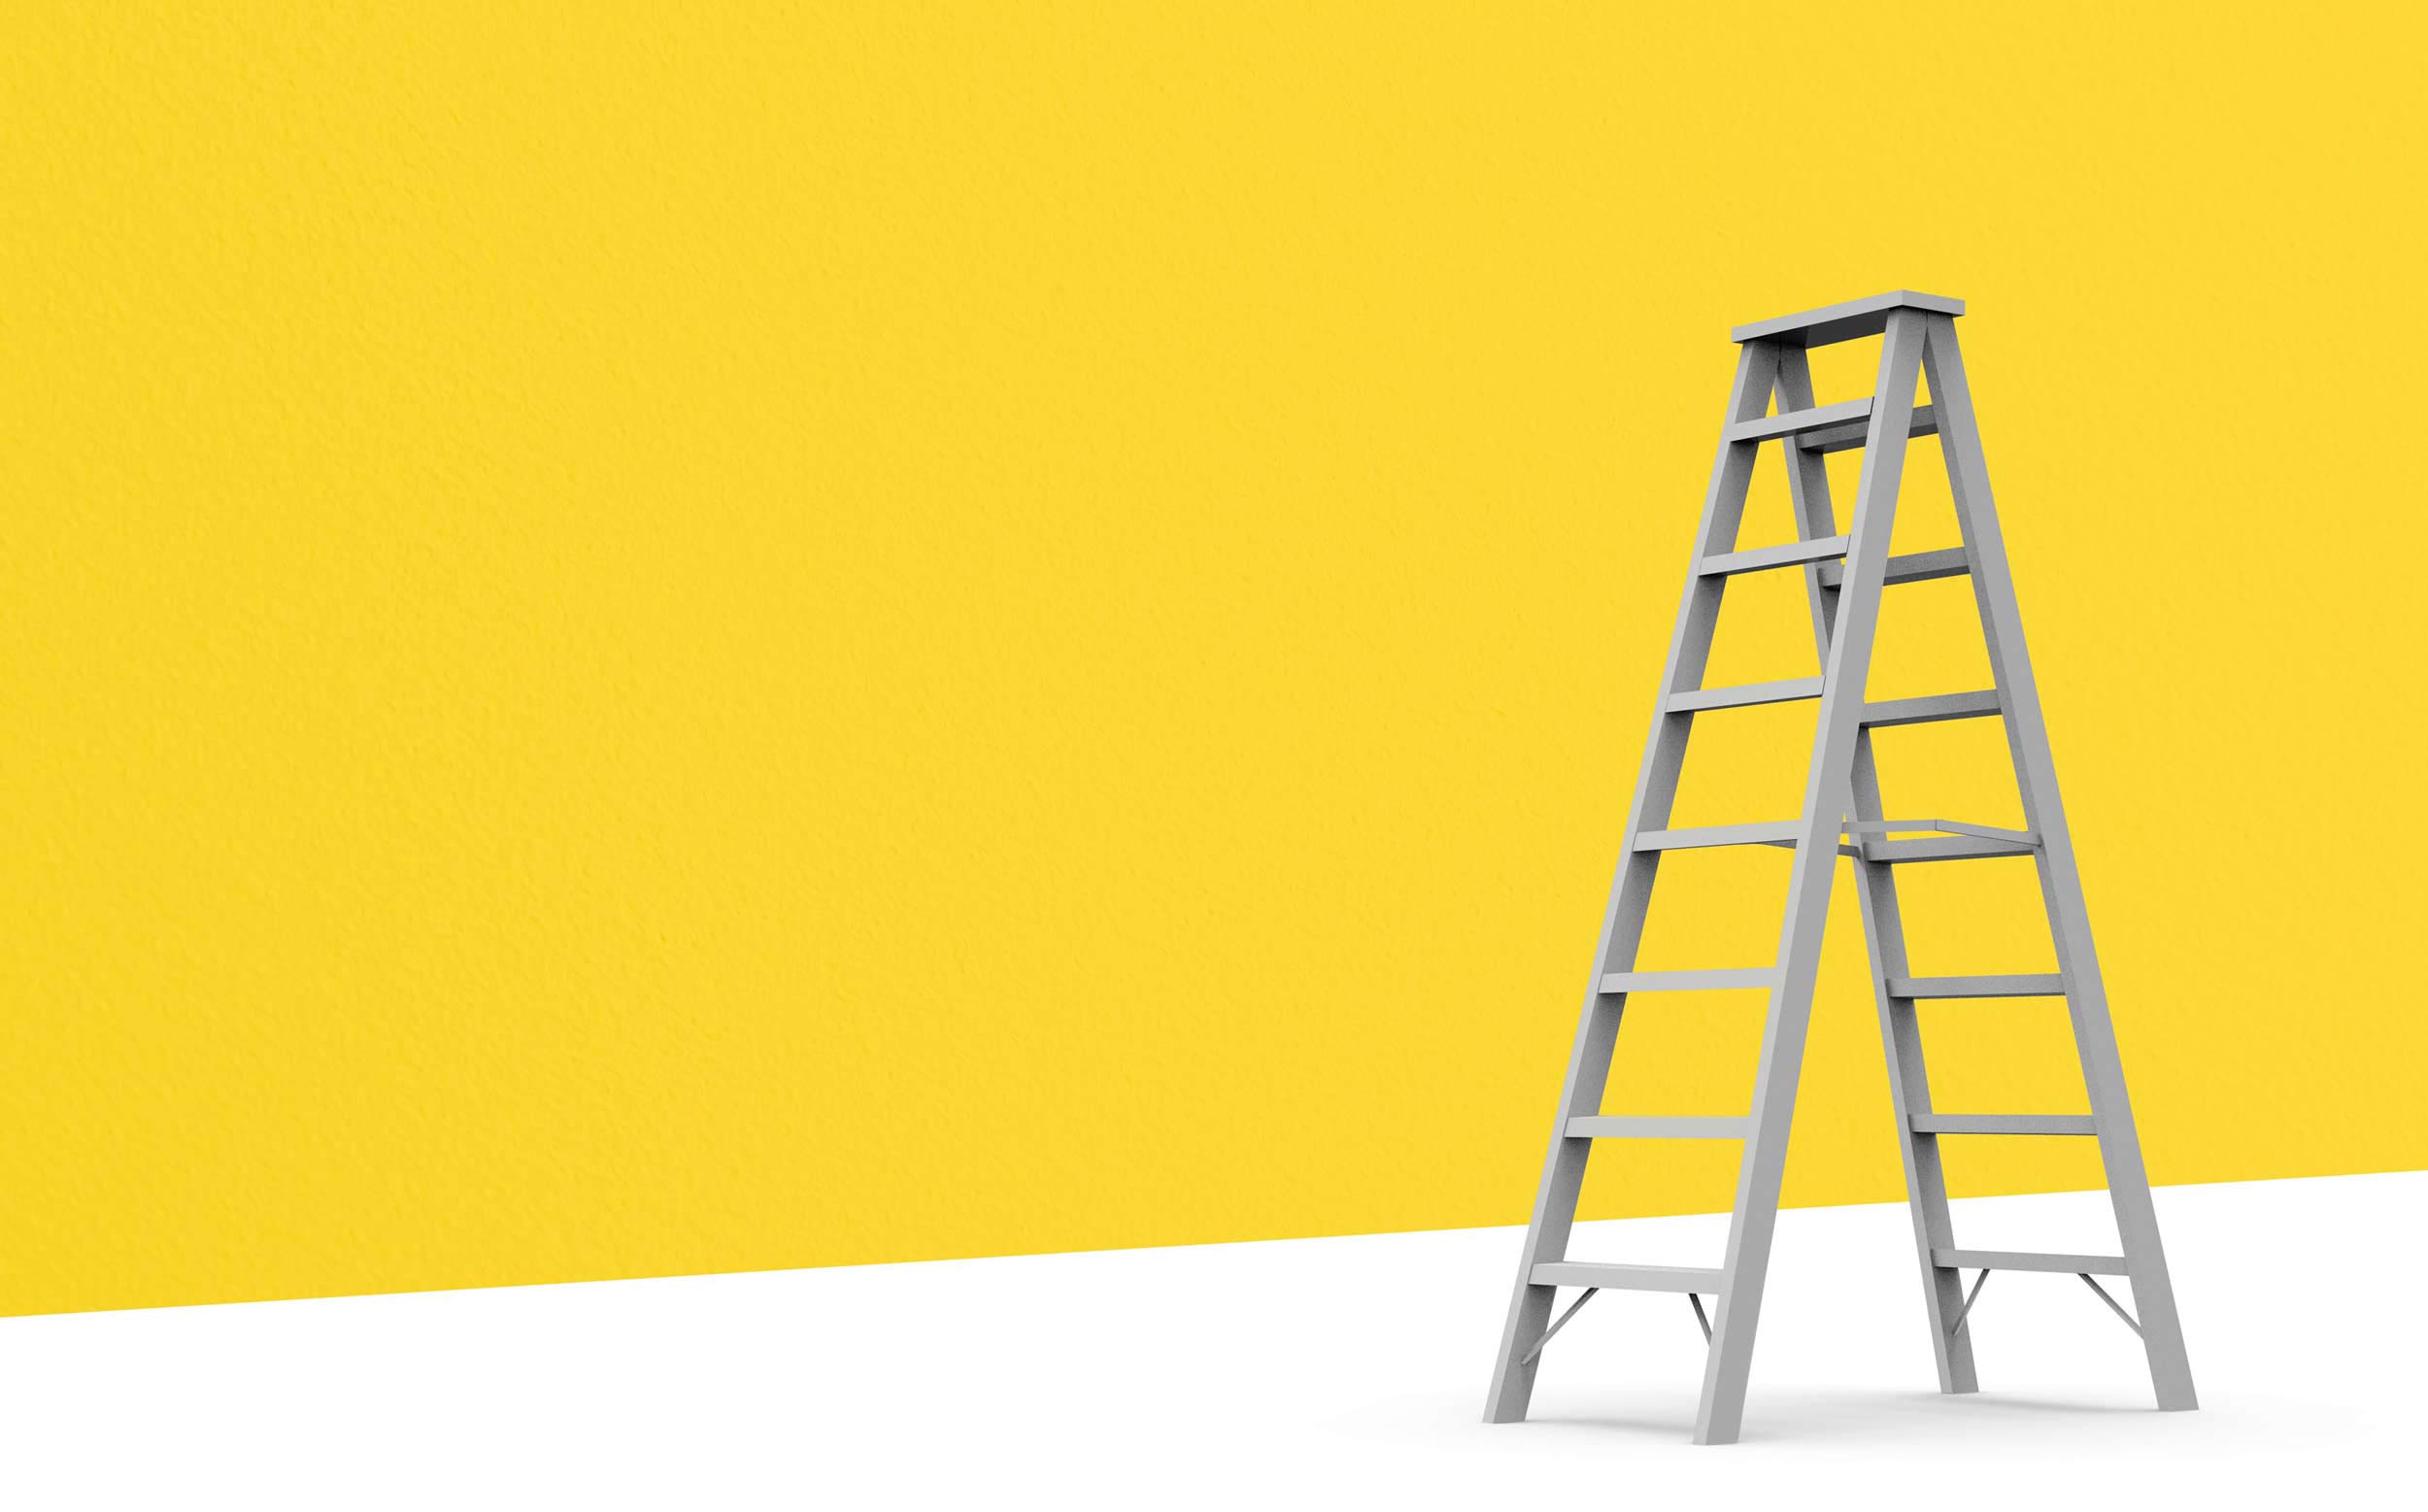 yellow background with work ladder in front